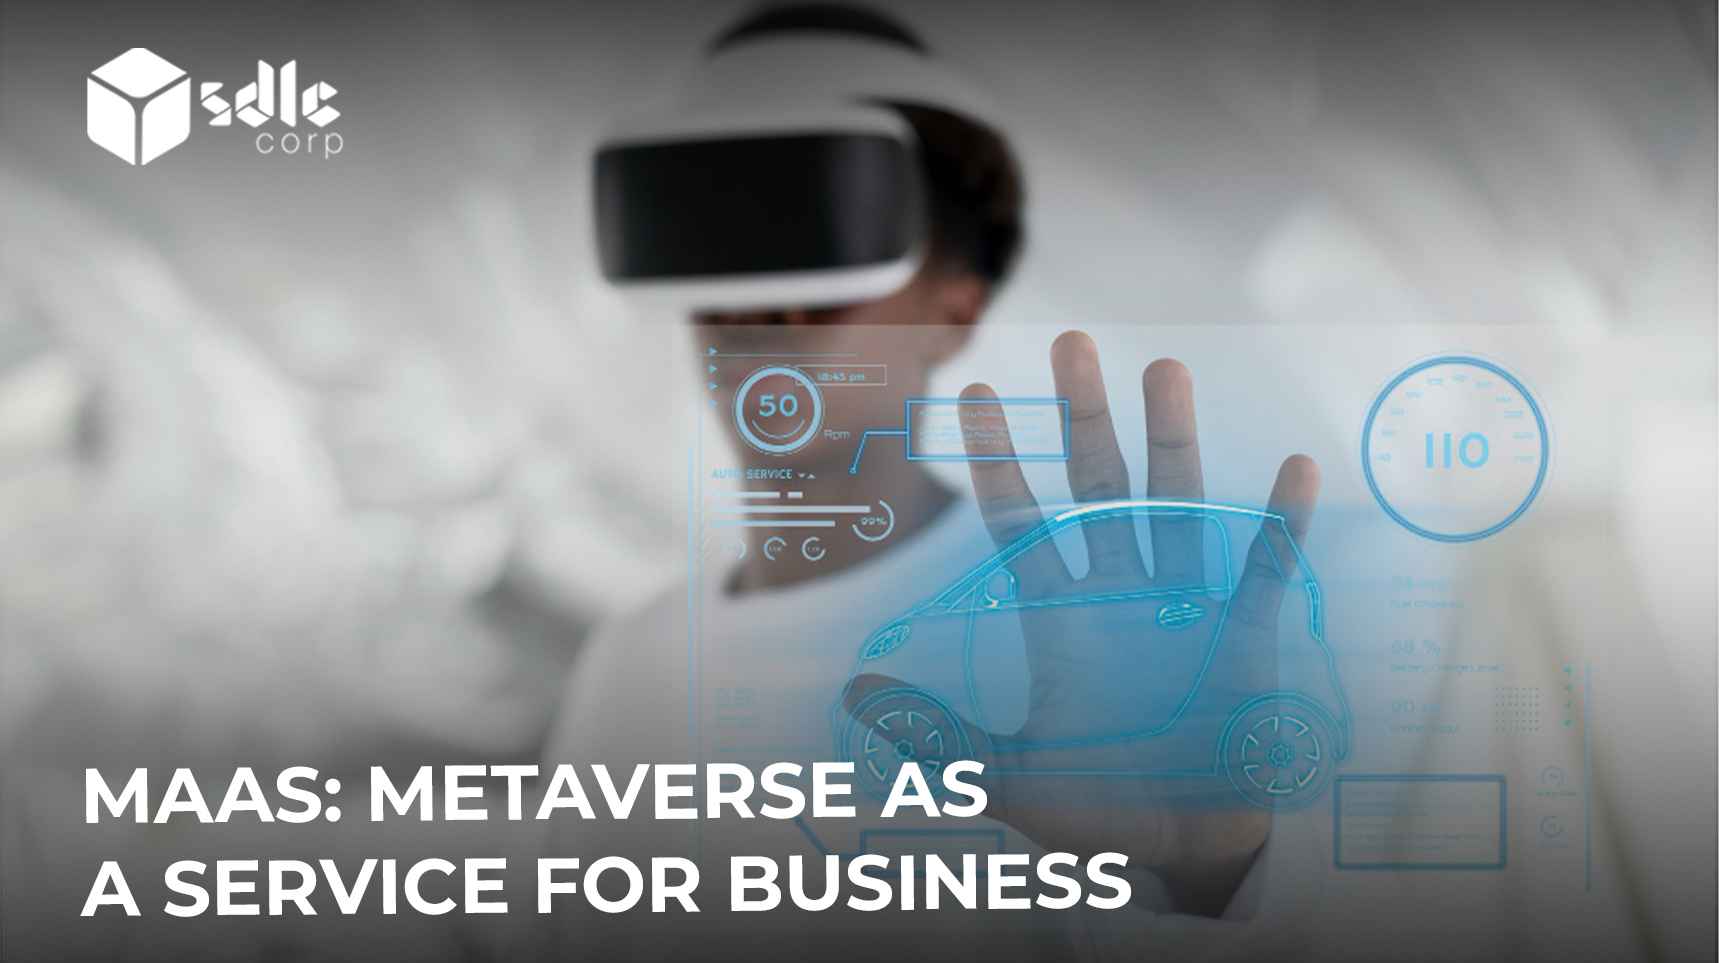 MAAS: Metaverse as a Service for Business